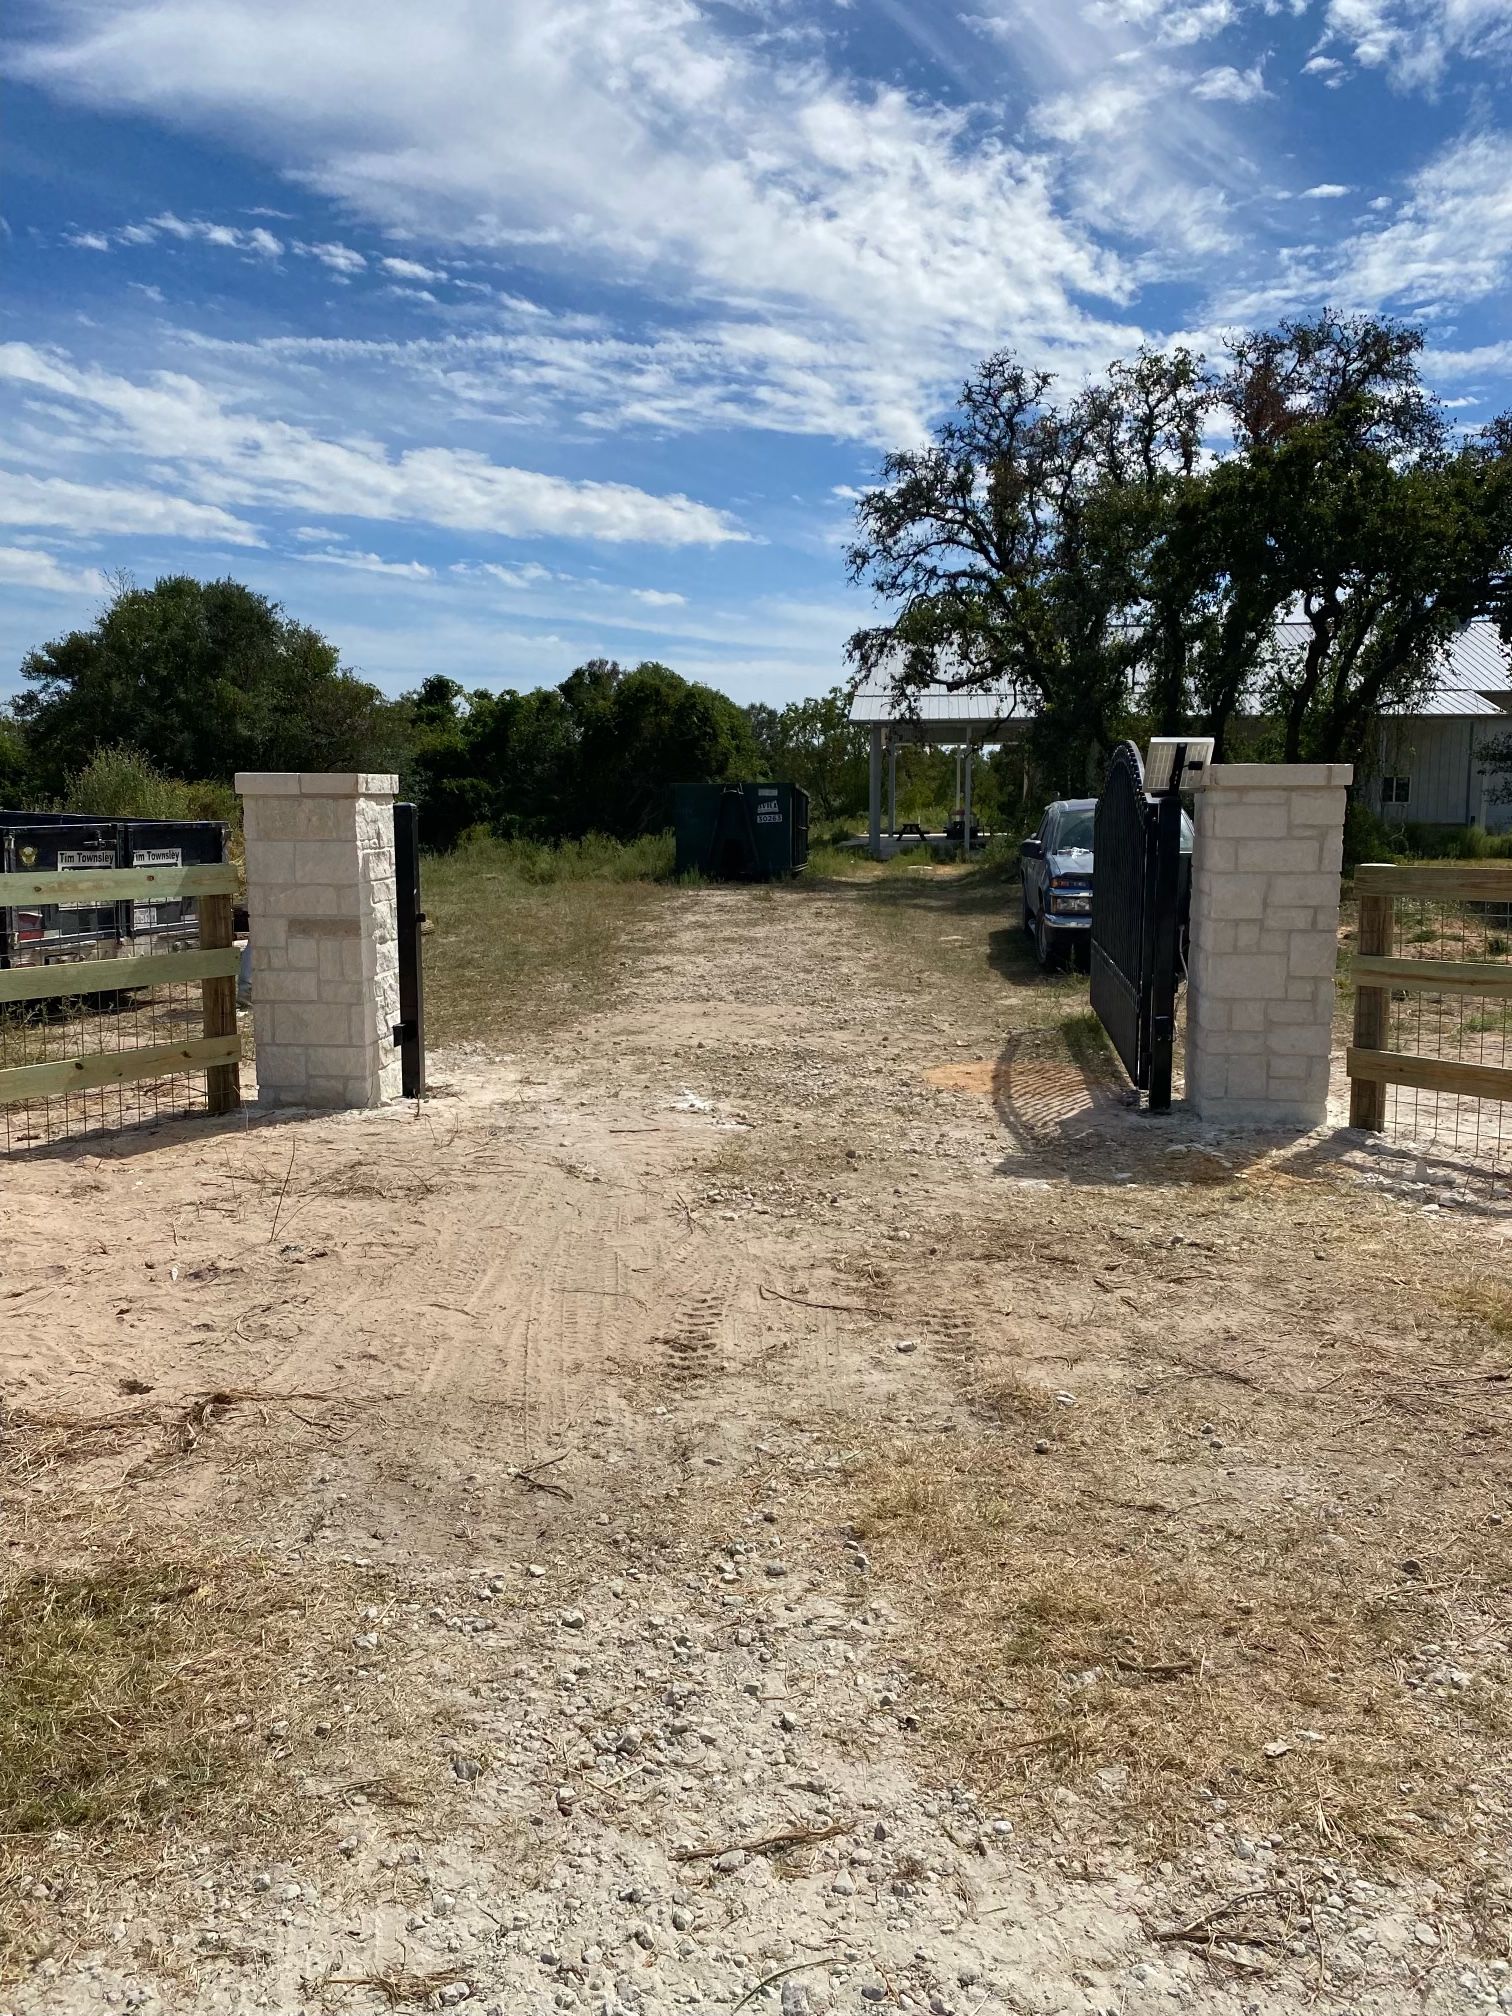 Privacy 3 Rail Fence for Pride Of Texas Fence Company in Brookshire, TX